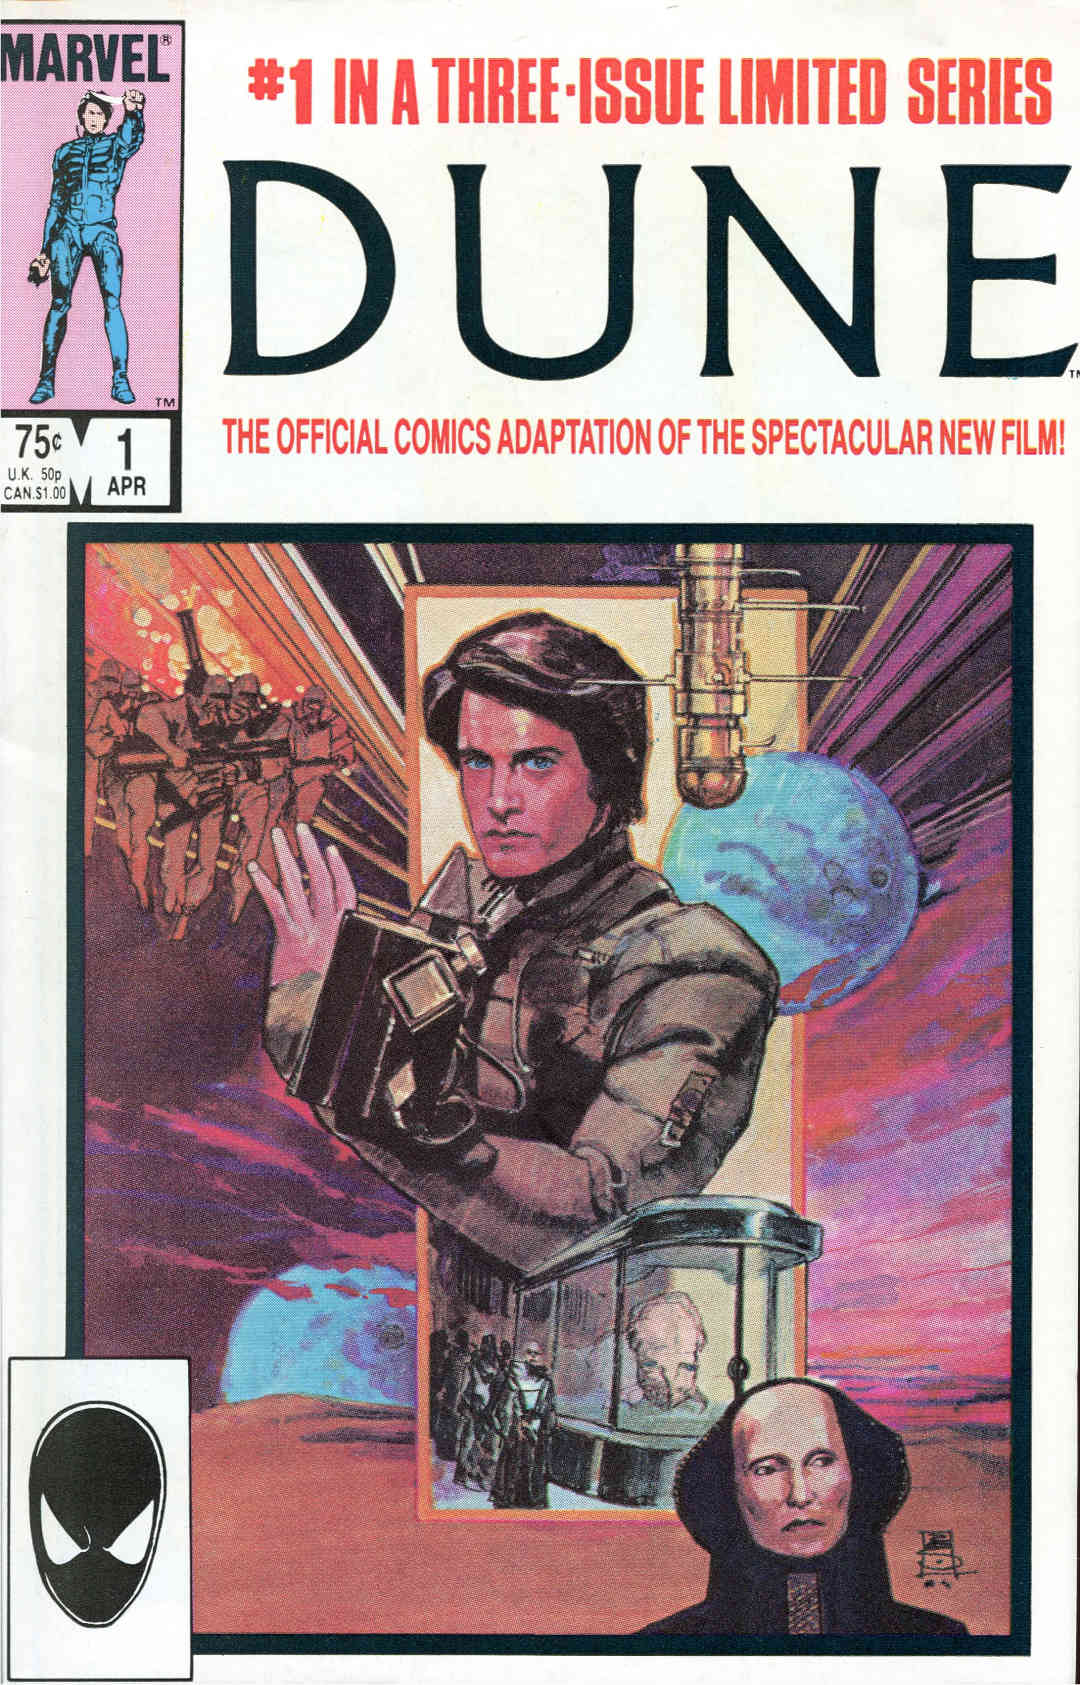 Cover of Marvel Comics 'Dune' #1, illustrated by Bill Sienkiewicz in 1985.